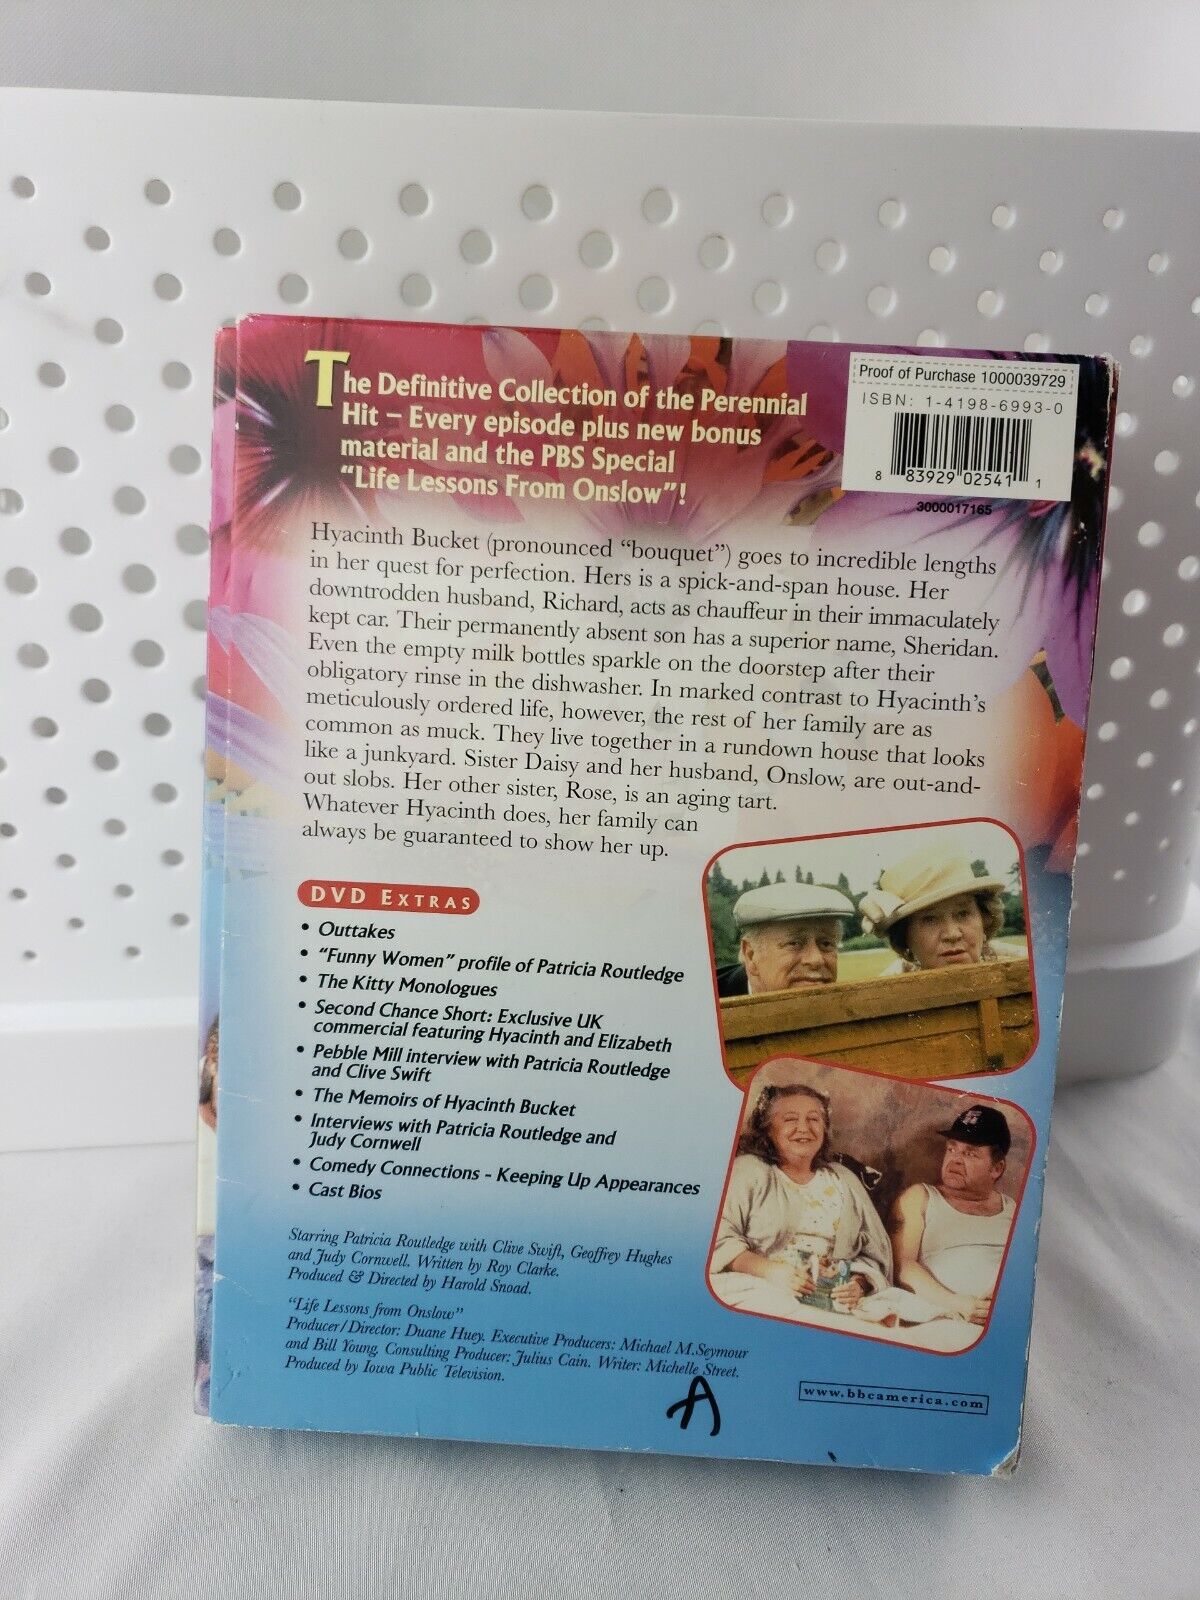 job element byrde Keeping Up Appearances: The Full Bouquet (DVD, 2008, 9-Disc Set, Special  Edition) for sale online | eBay